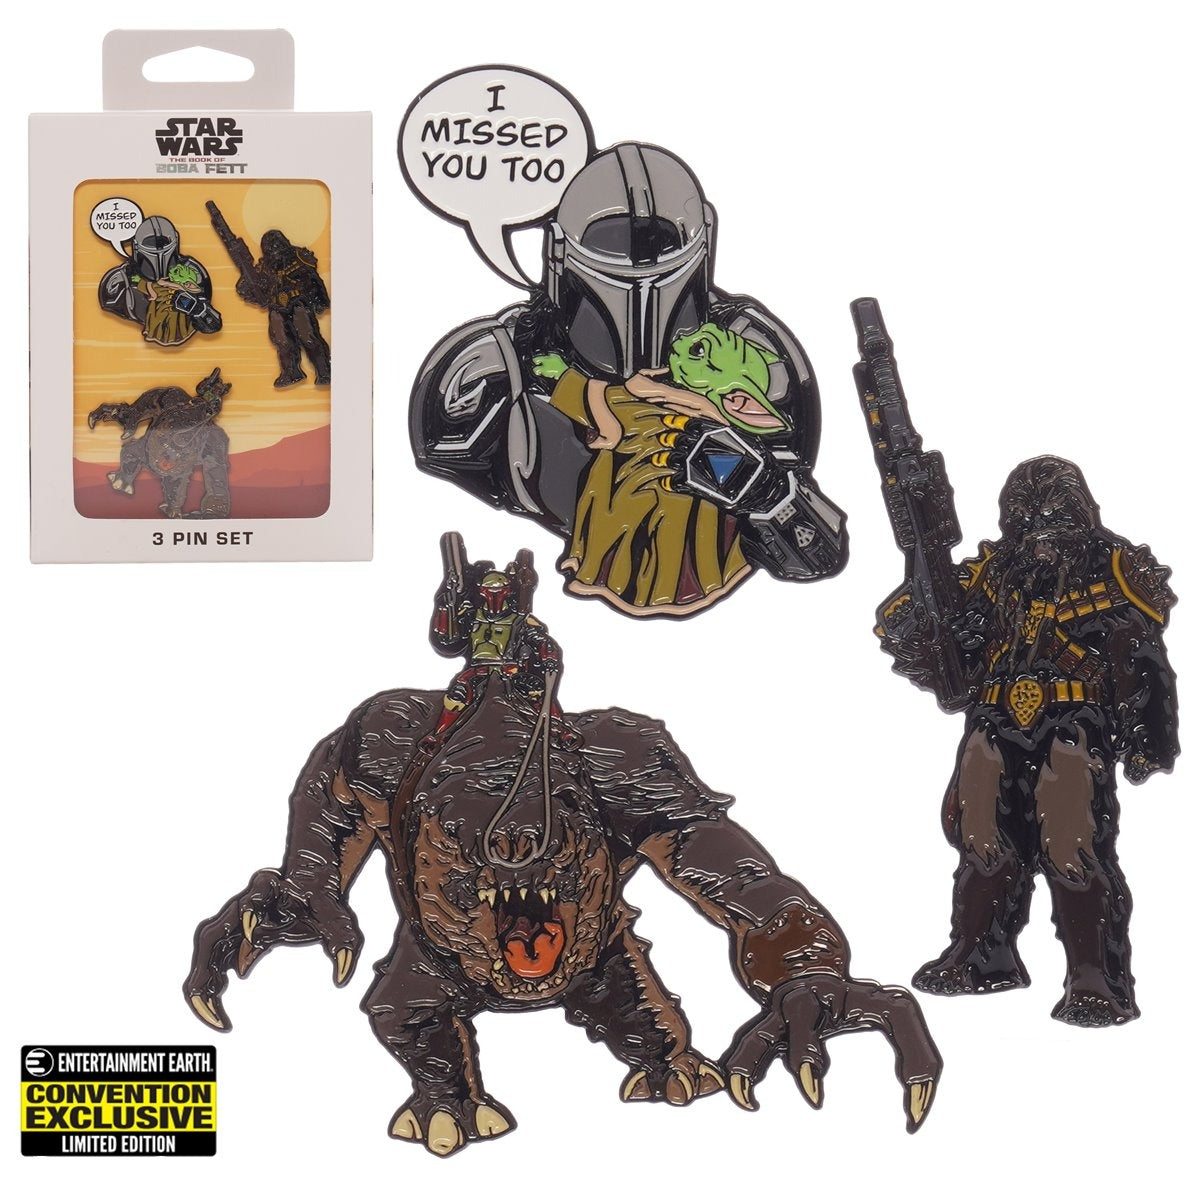 Star Wars: The Book of Boba Fett Pins 3-Pack EE Exclusive